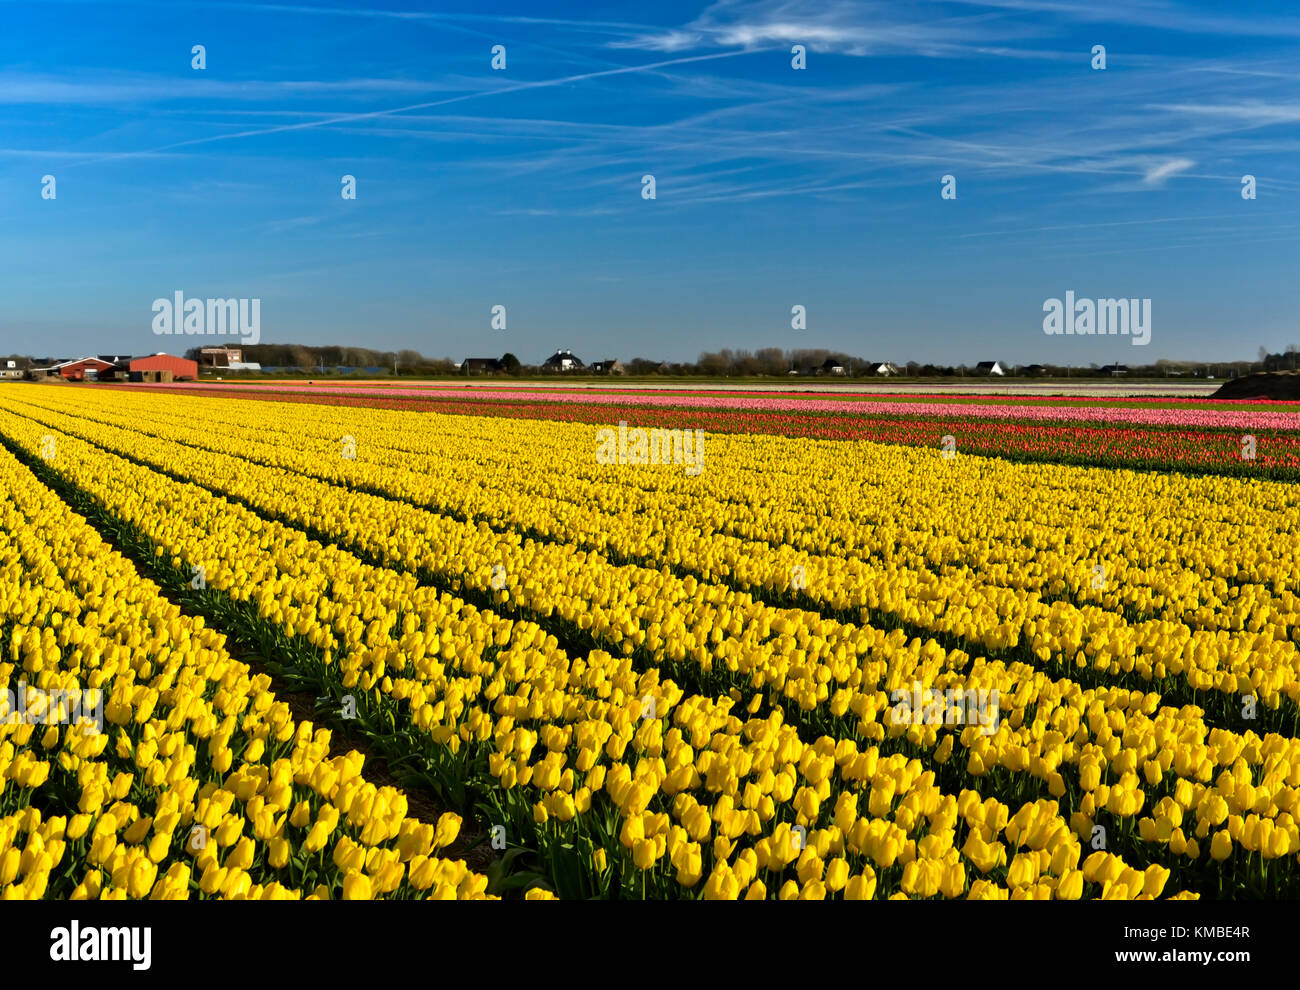 Field of yellow tulips of the species Yellow Purissima for the production of flower bulbs in the Bollenstreek area, Noordwijkerhout, Netherlands Stock Photo